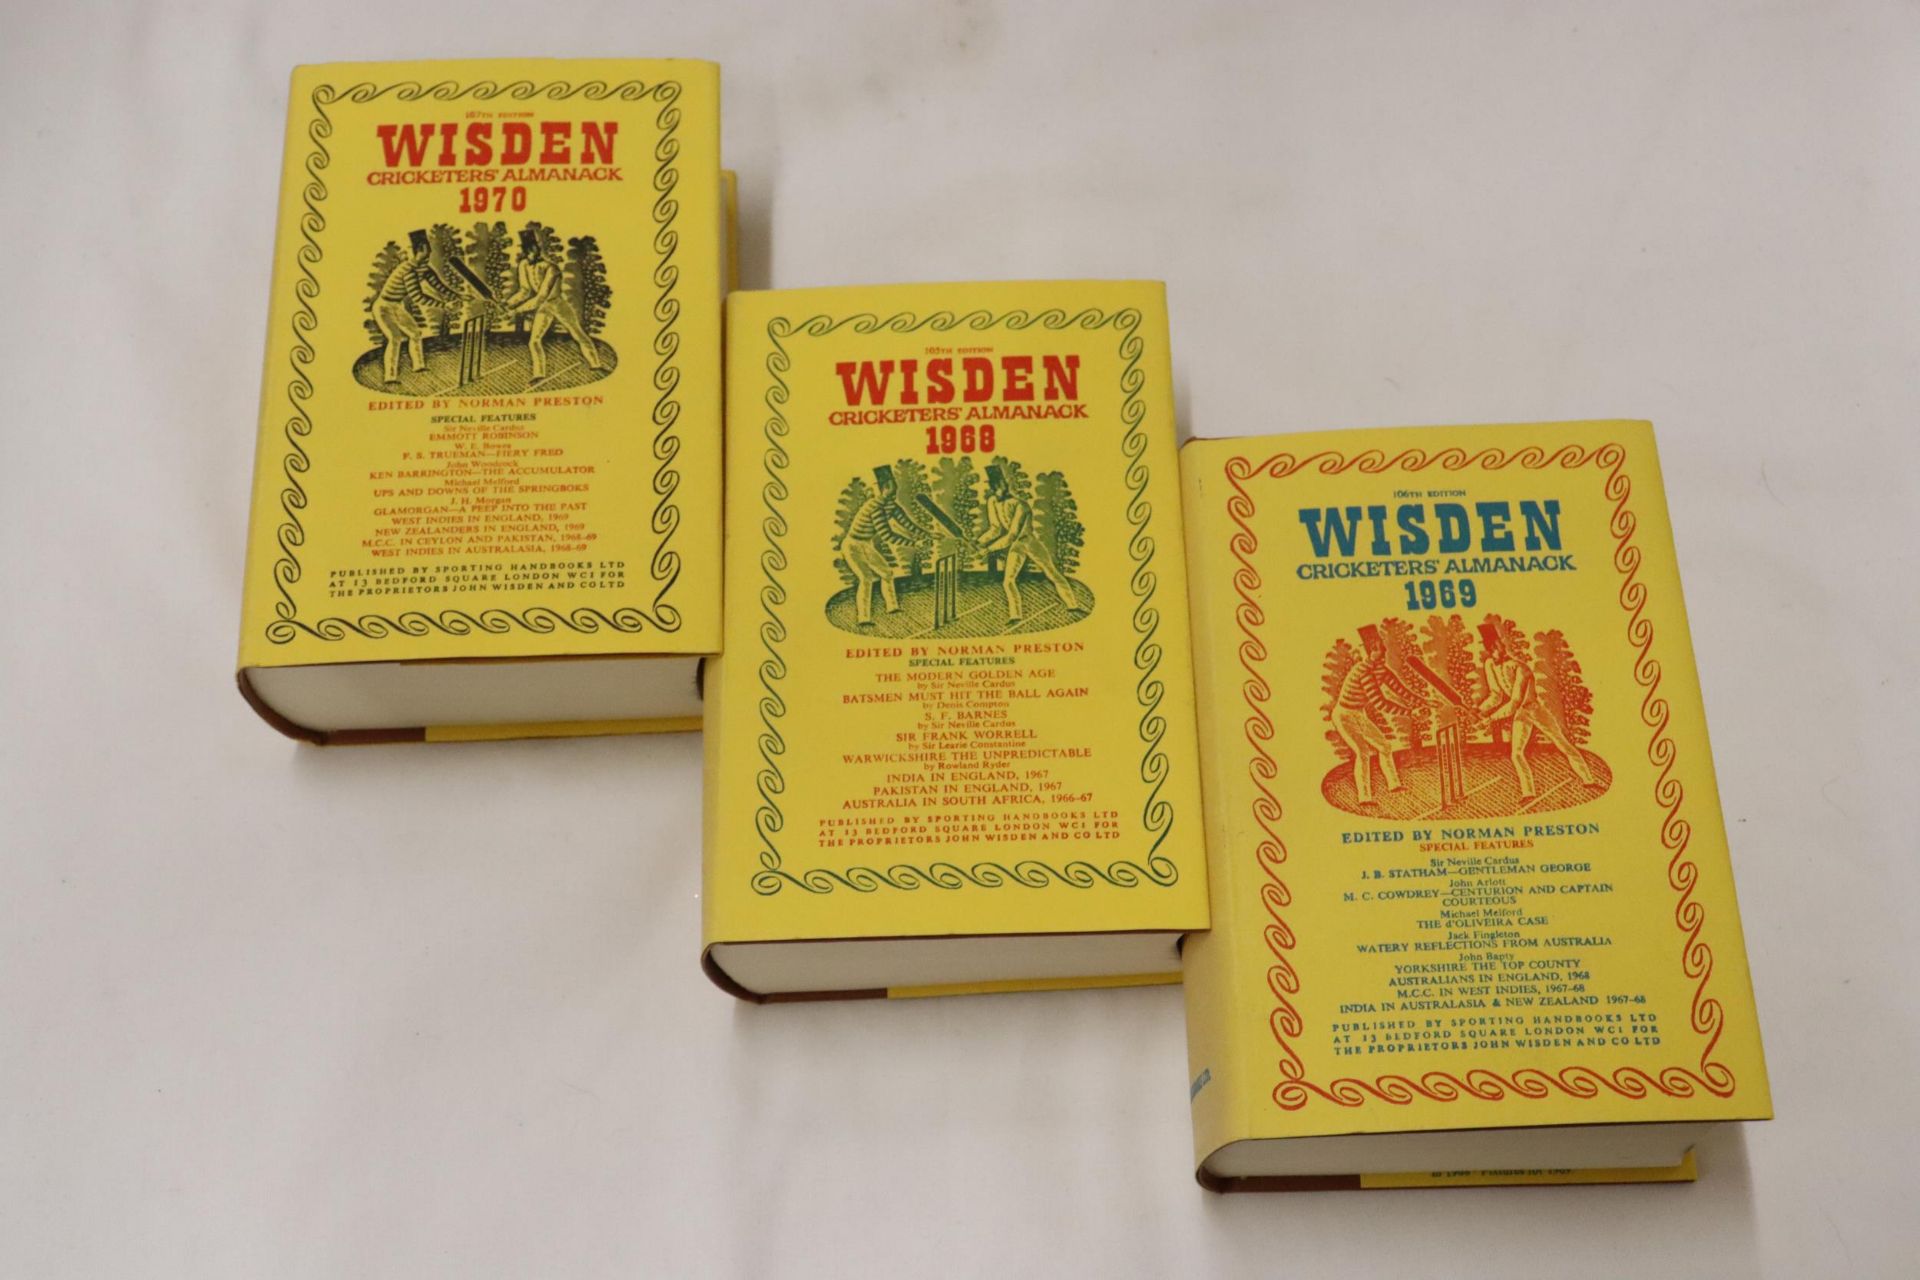 THREE HARDBACK COPIES OF WISDEN'S CRICKETER'S ALMANACKS, 1968, 1969 AND 1970. THESE COPIES ARE IN